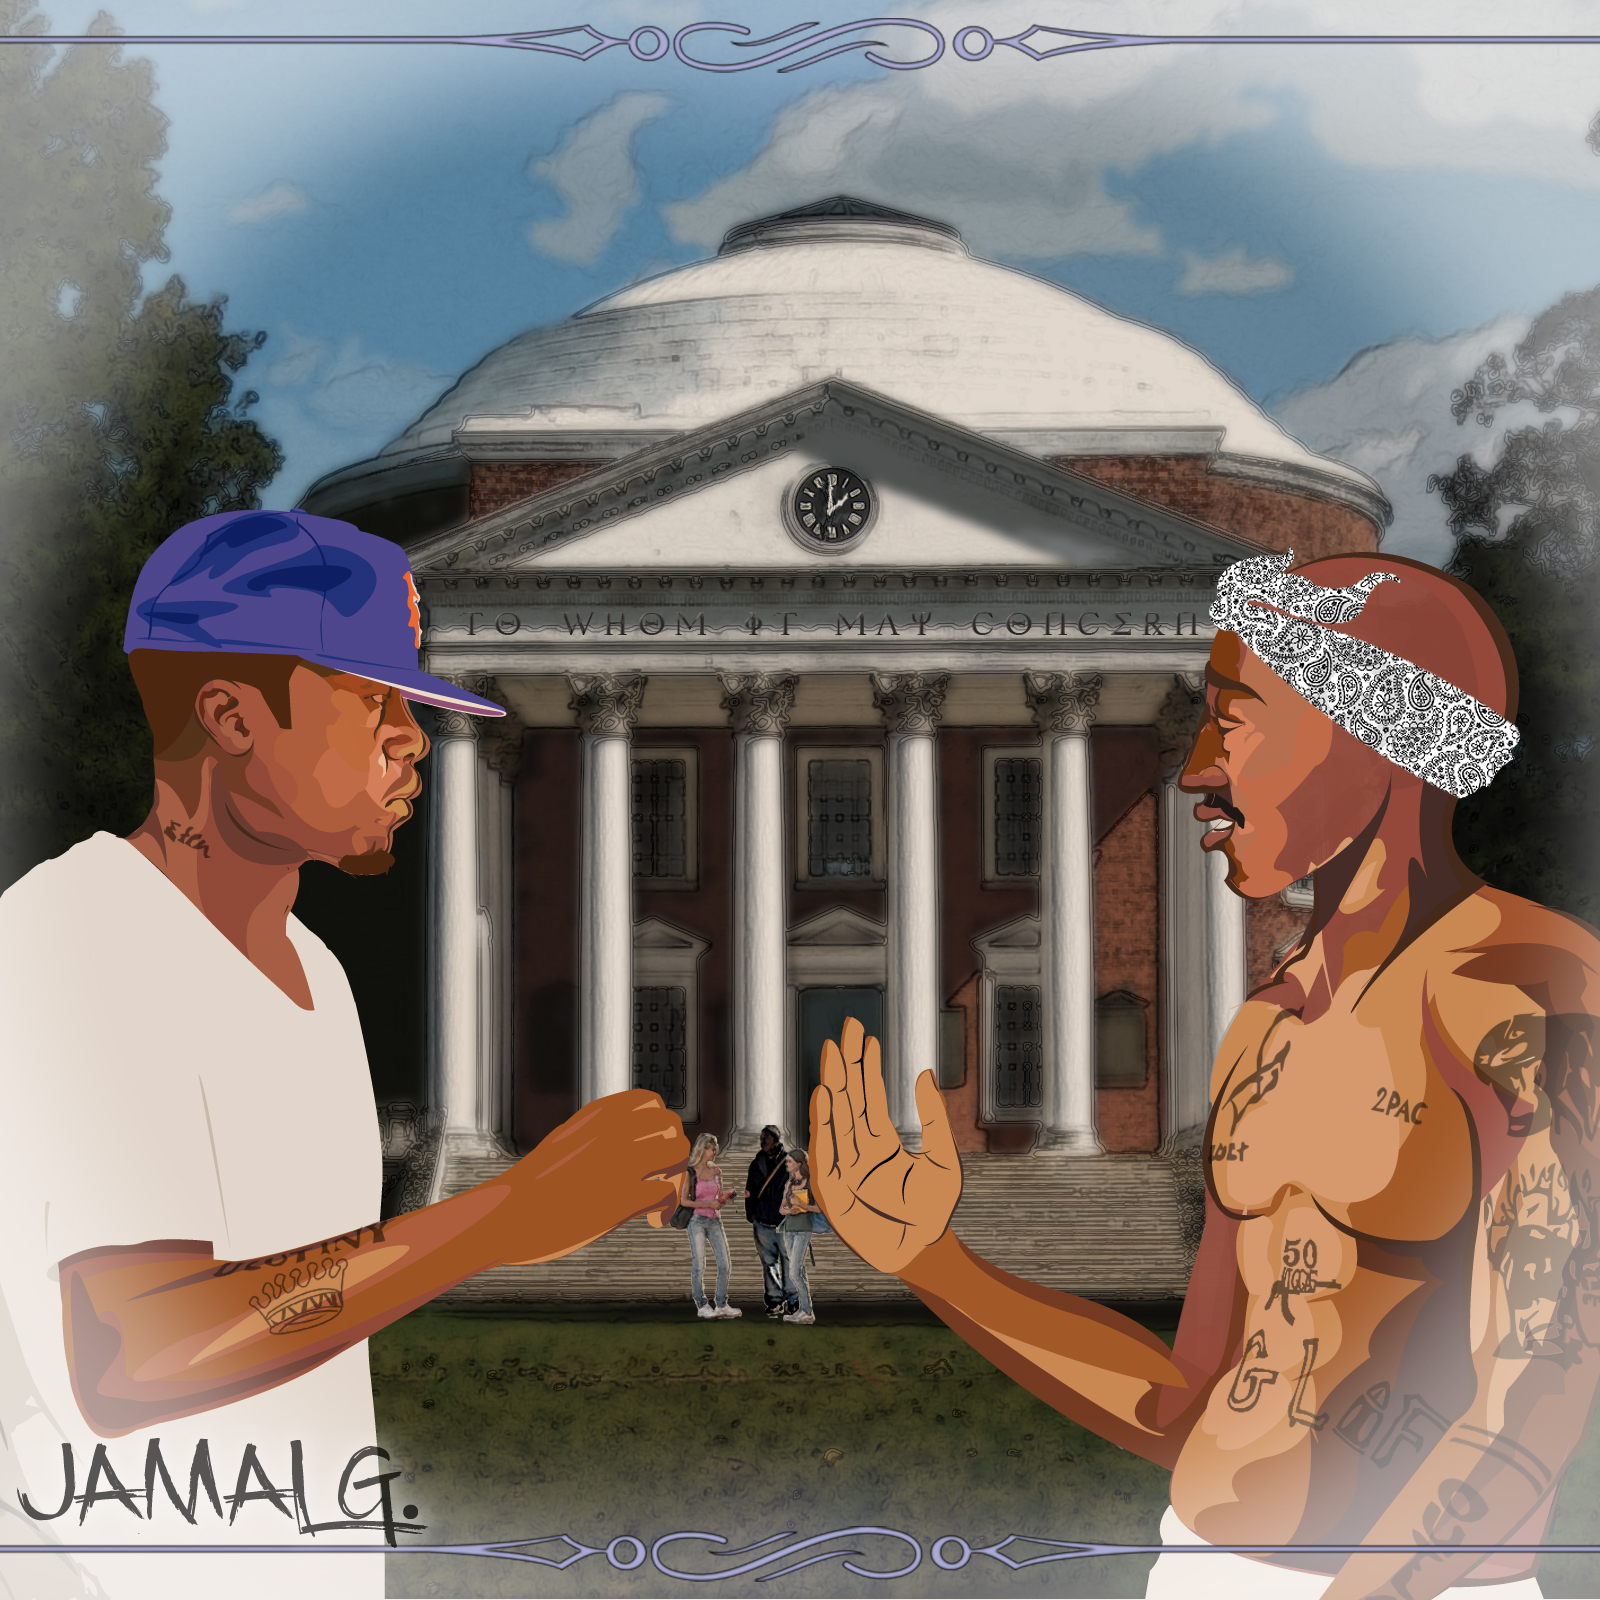 [New Music] 'To Whom It May Concern 2: Final Draft' - Jamal G